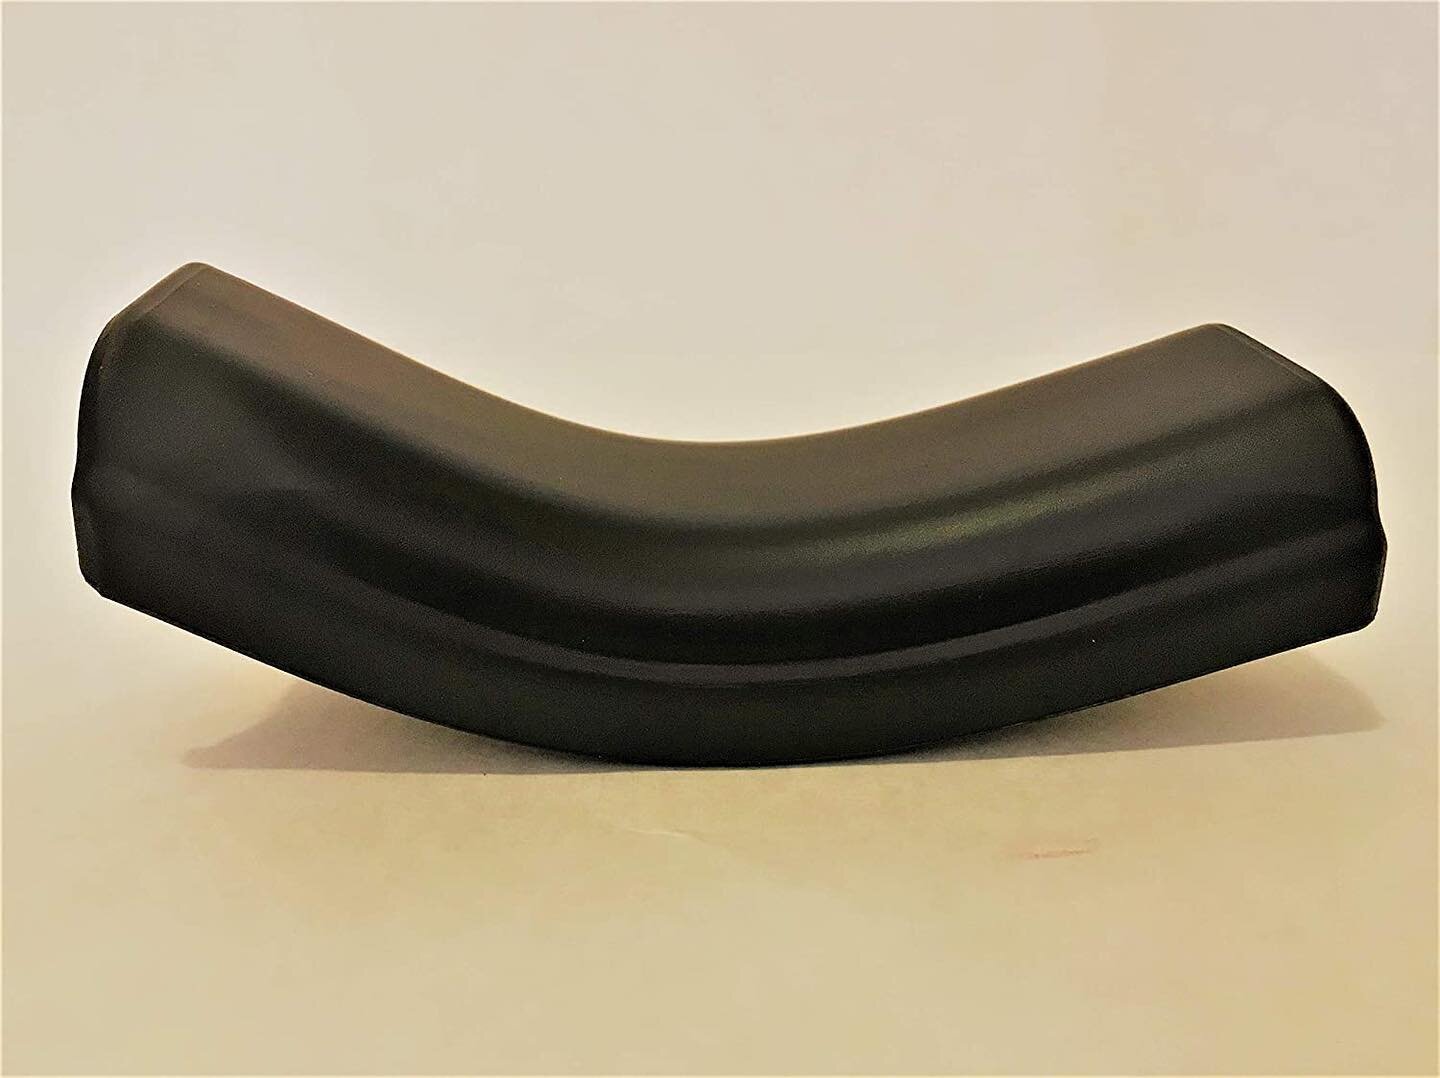 🎸We utilize our custom 3D designed molds to produce one of a kind form fitting GSNM parts. 

These GSNM's easily connect to the bottom rail of the guitar. 

This easy-on / easy-off solution is constructed of a soft tactile material safe for all guit